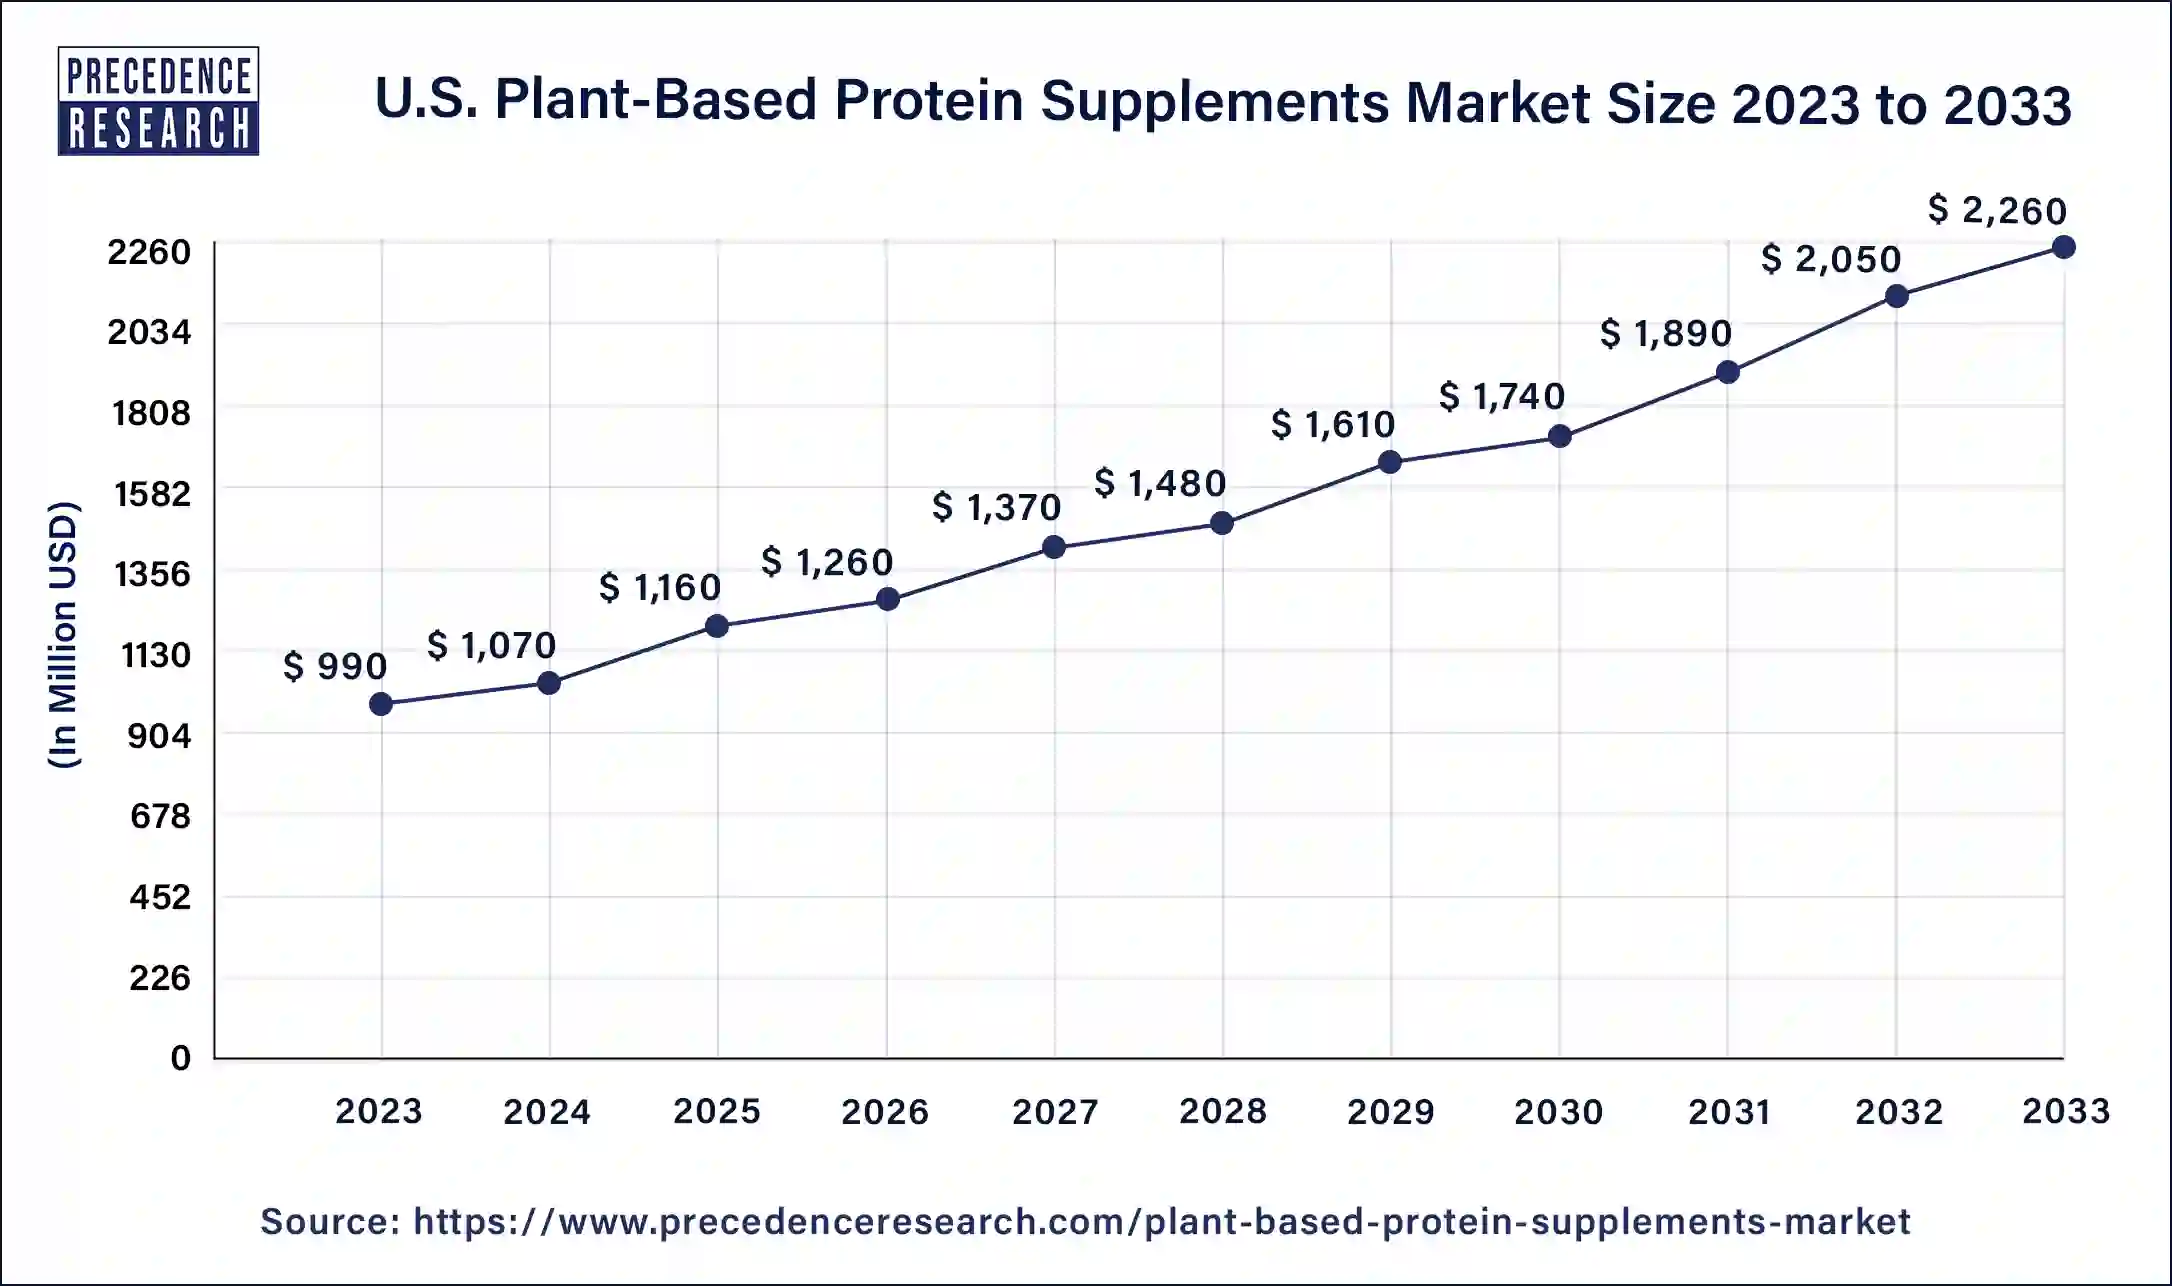 U.S. Plant-Based Protein Supplements Market Size 2024 to 2033